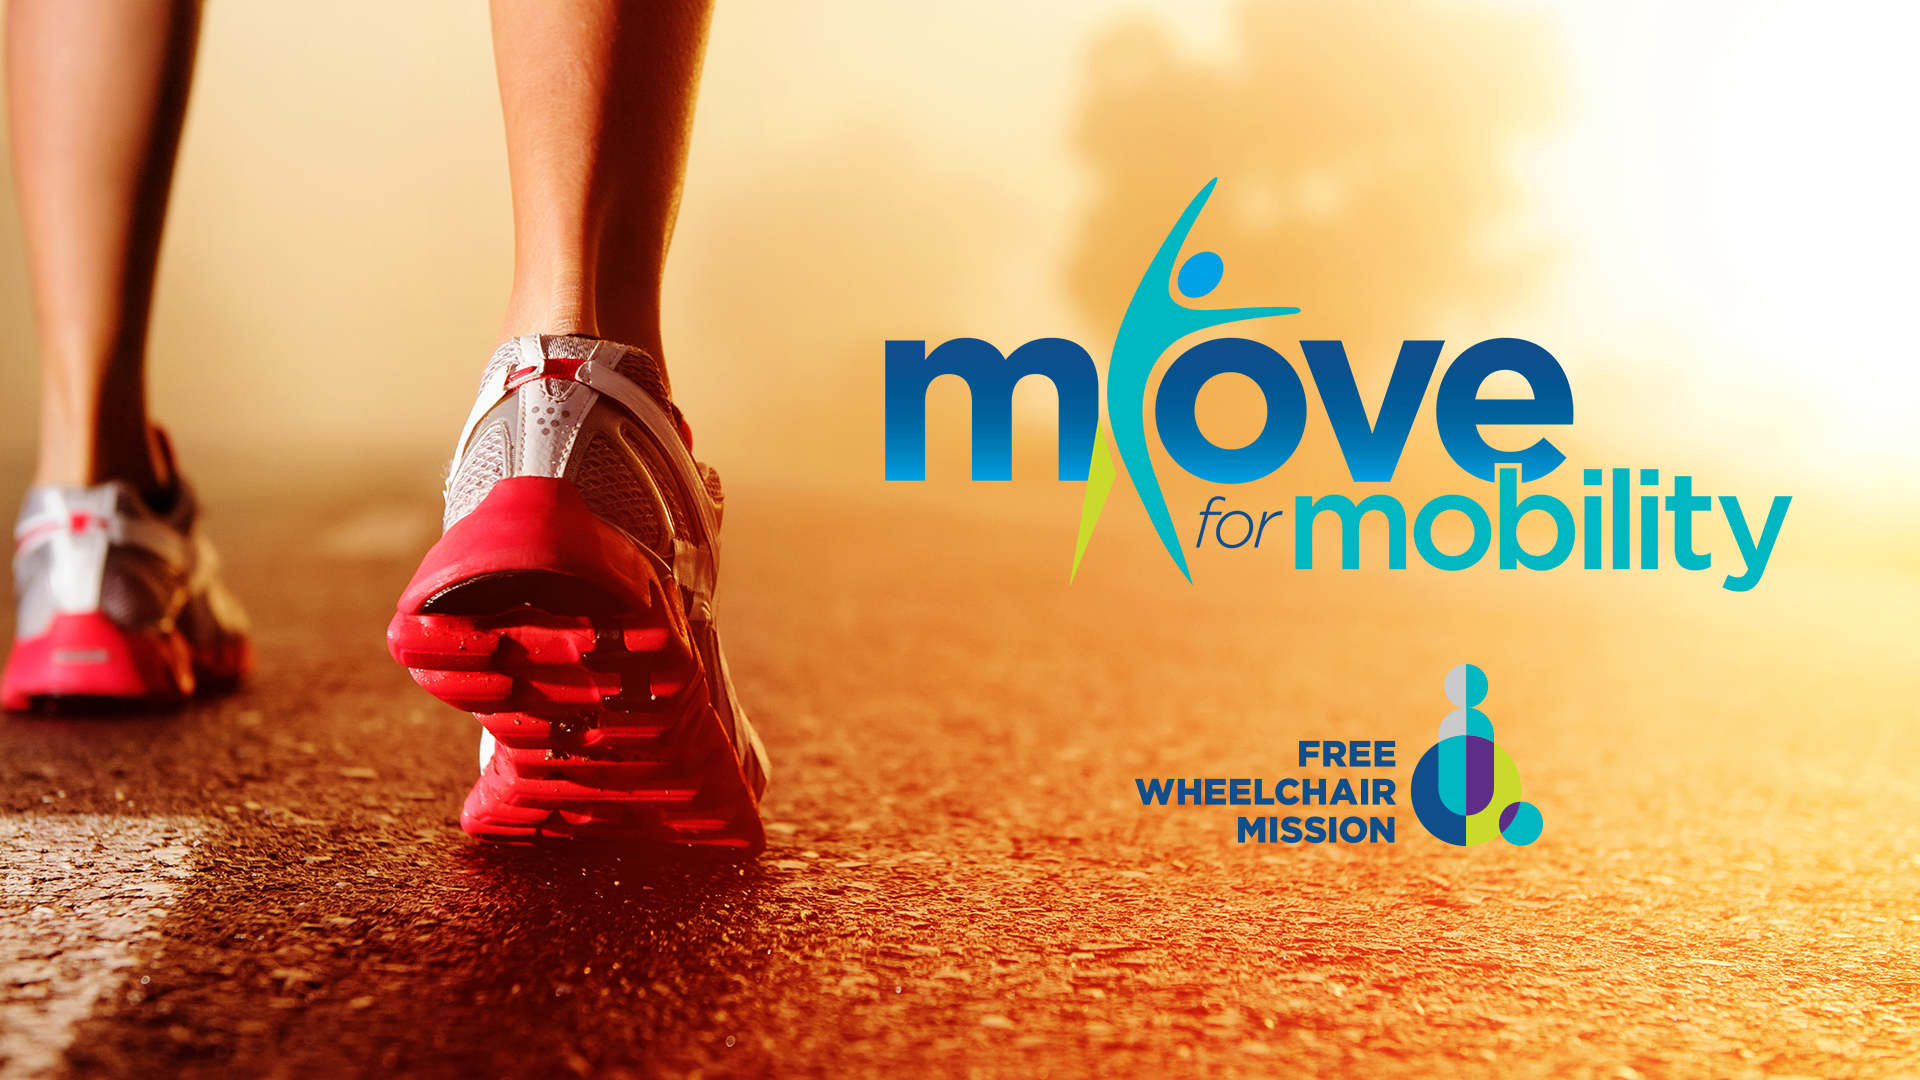 Free Wheelchair Mission - Move for Mobility - Campaign